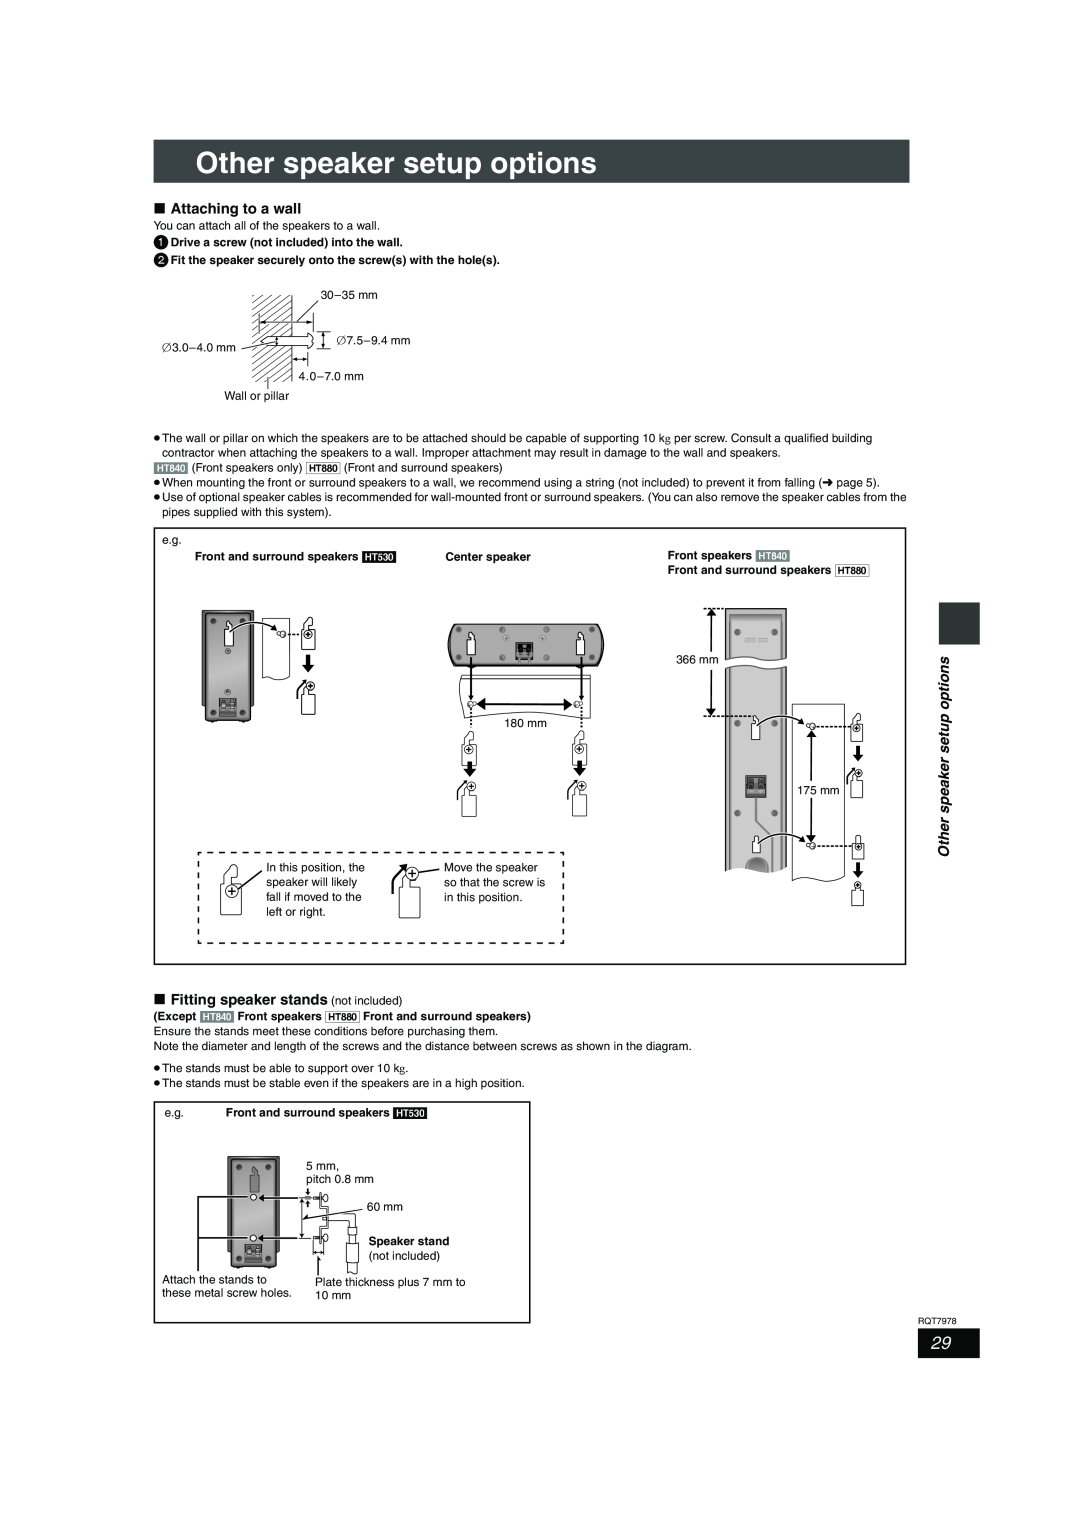 Panasonic SC-HT530, SC-HT880, SC-HT840 manual Other speaker setup options, Attaching to a wall 